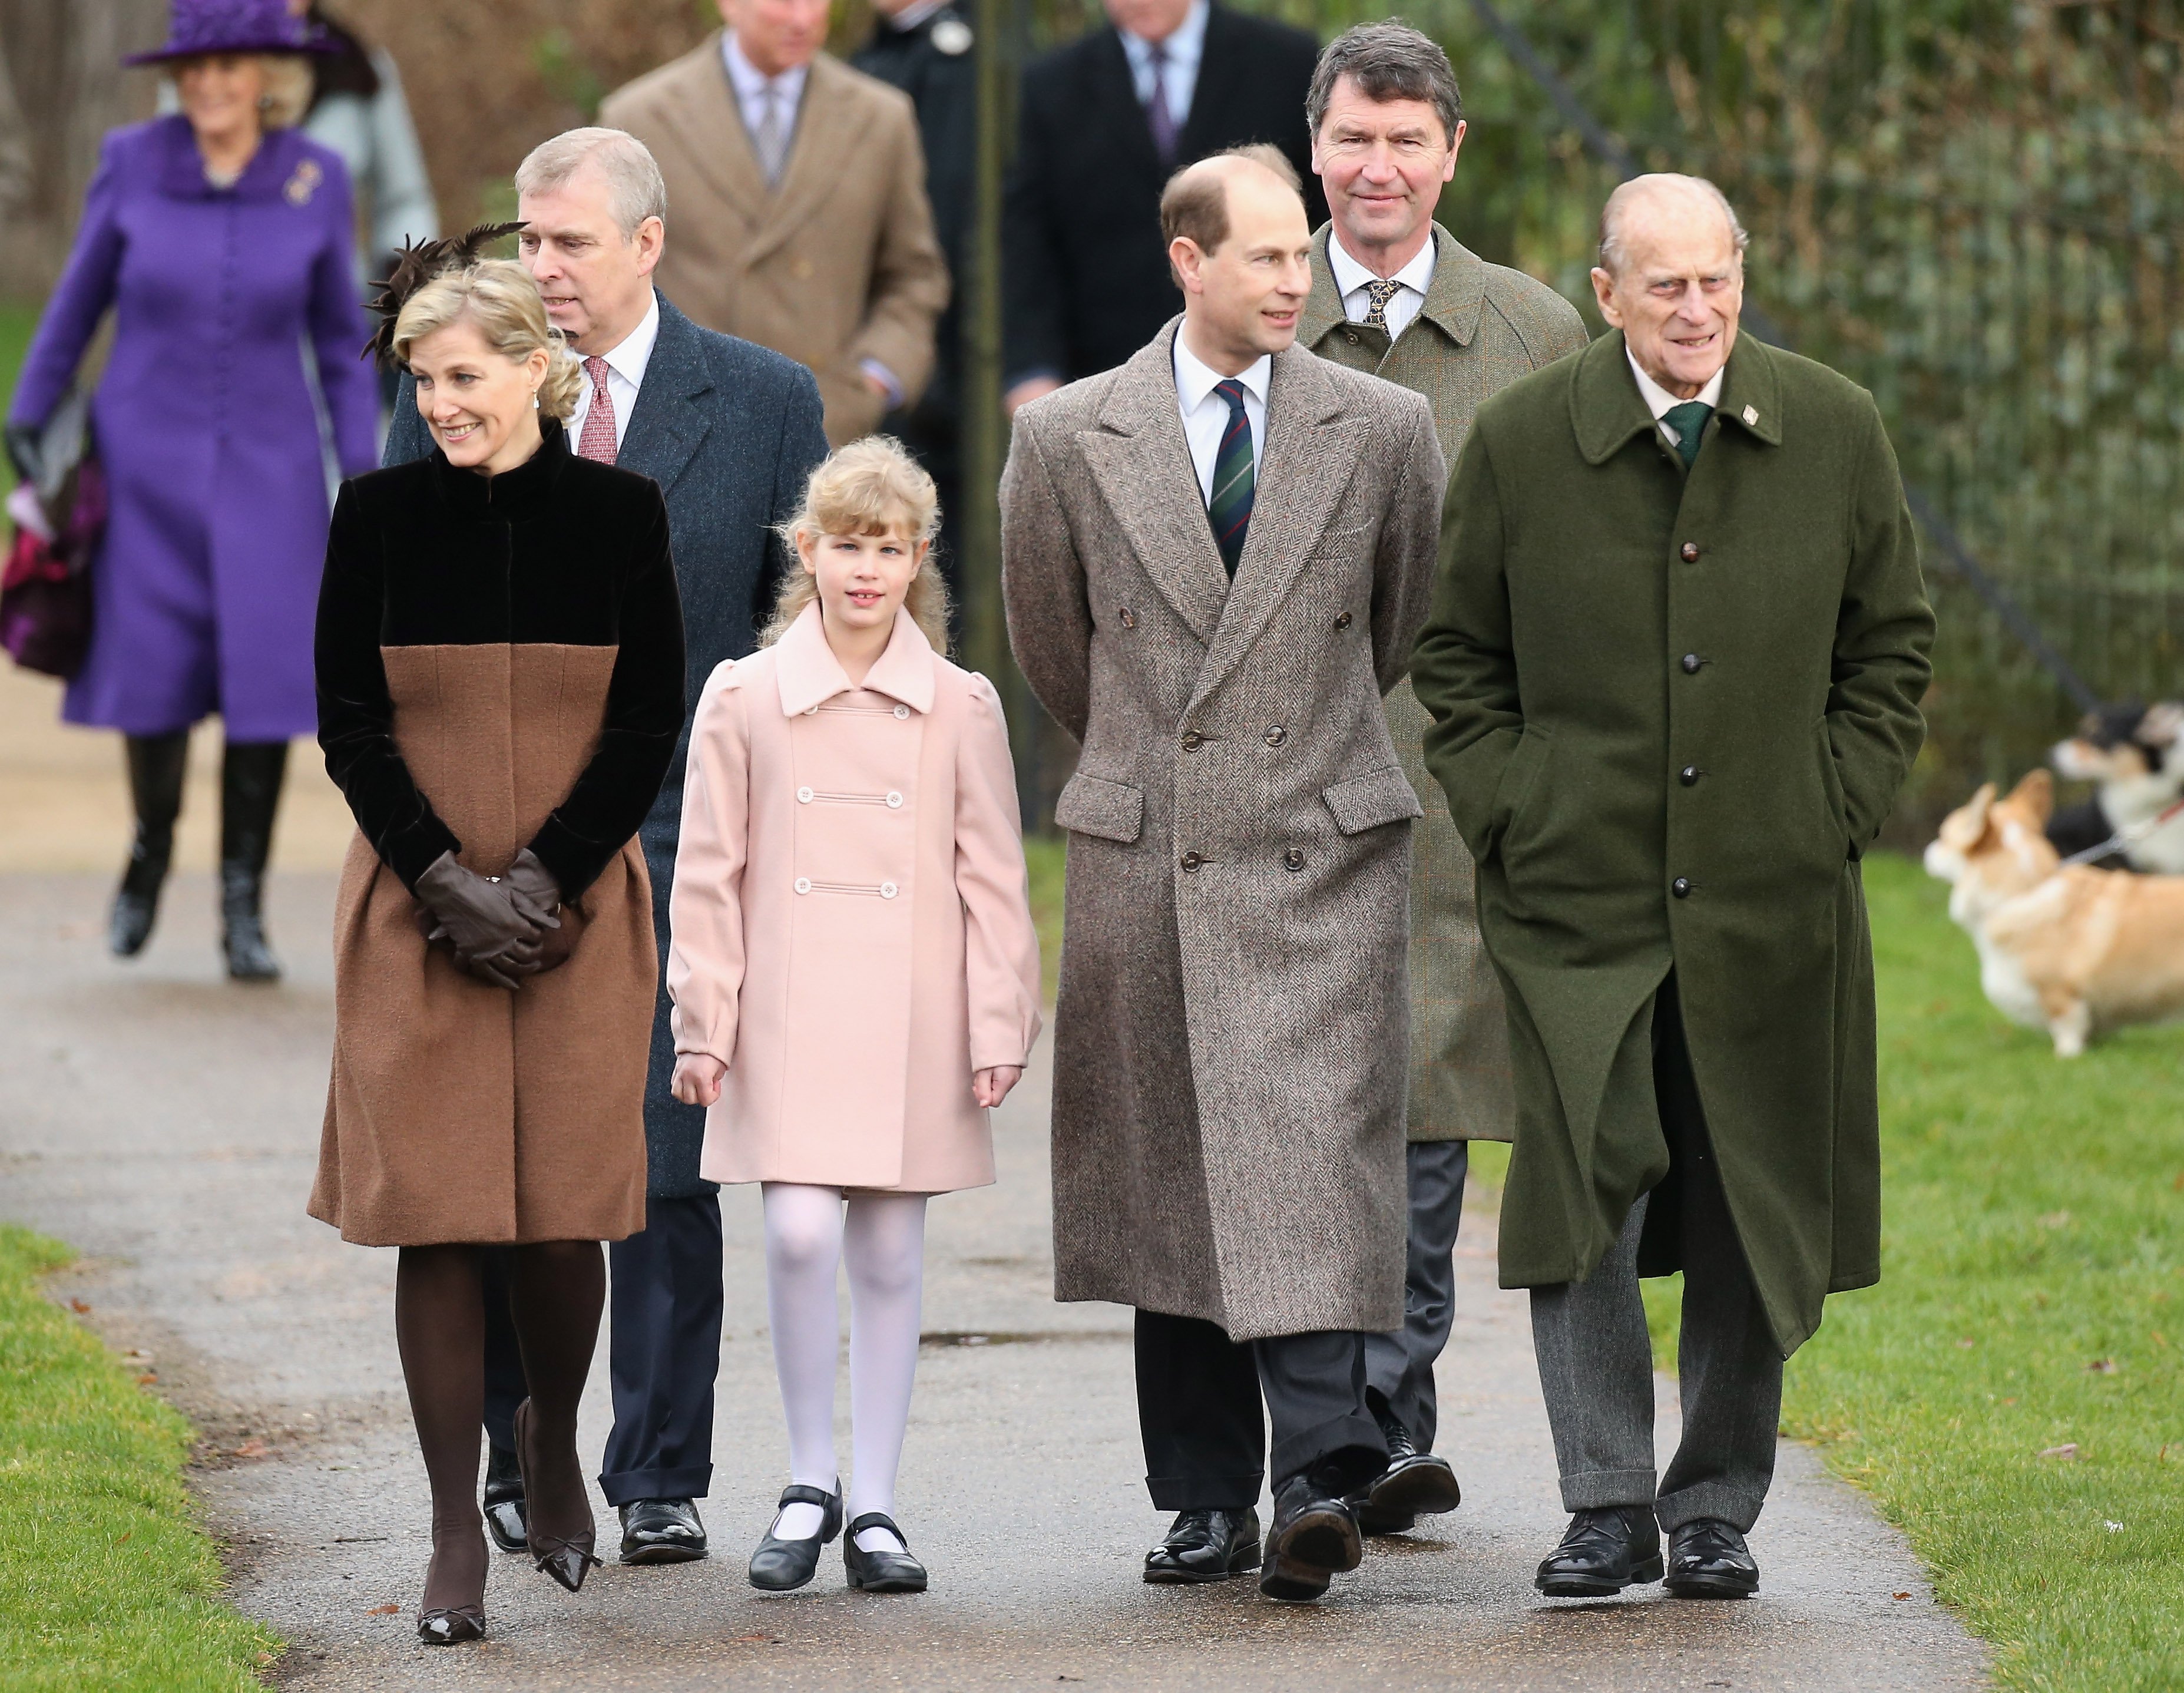 Sophie, Lady Louise Windsor, Prince Edward, and Prince Philip at St. Mary Magdalene Church, Sandringham, on December 25, 2012 | Source: Getty Images